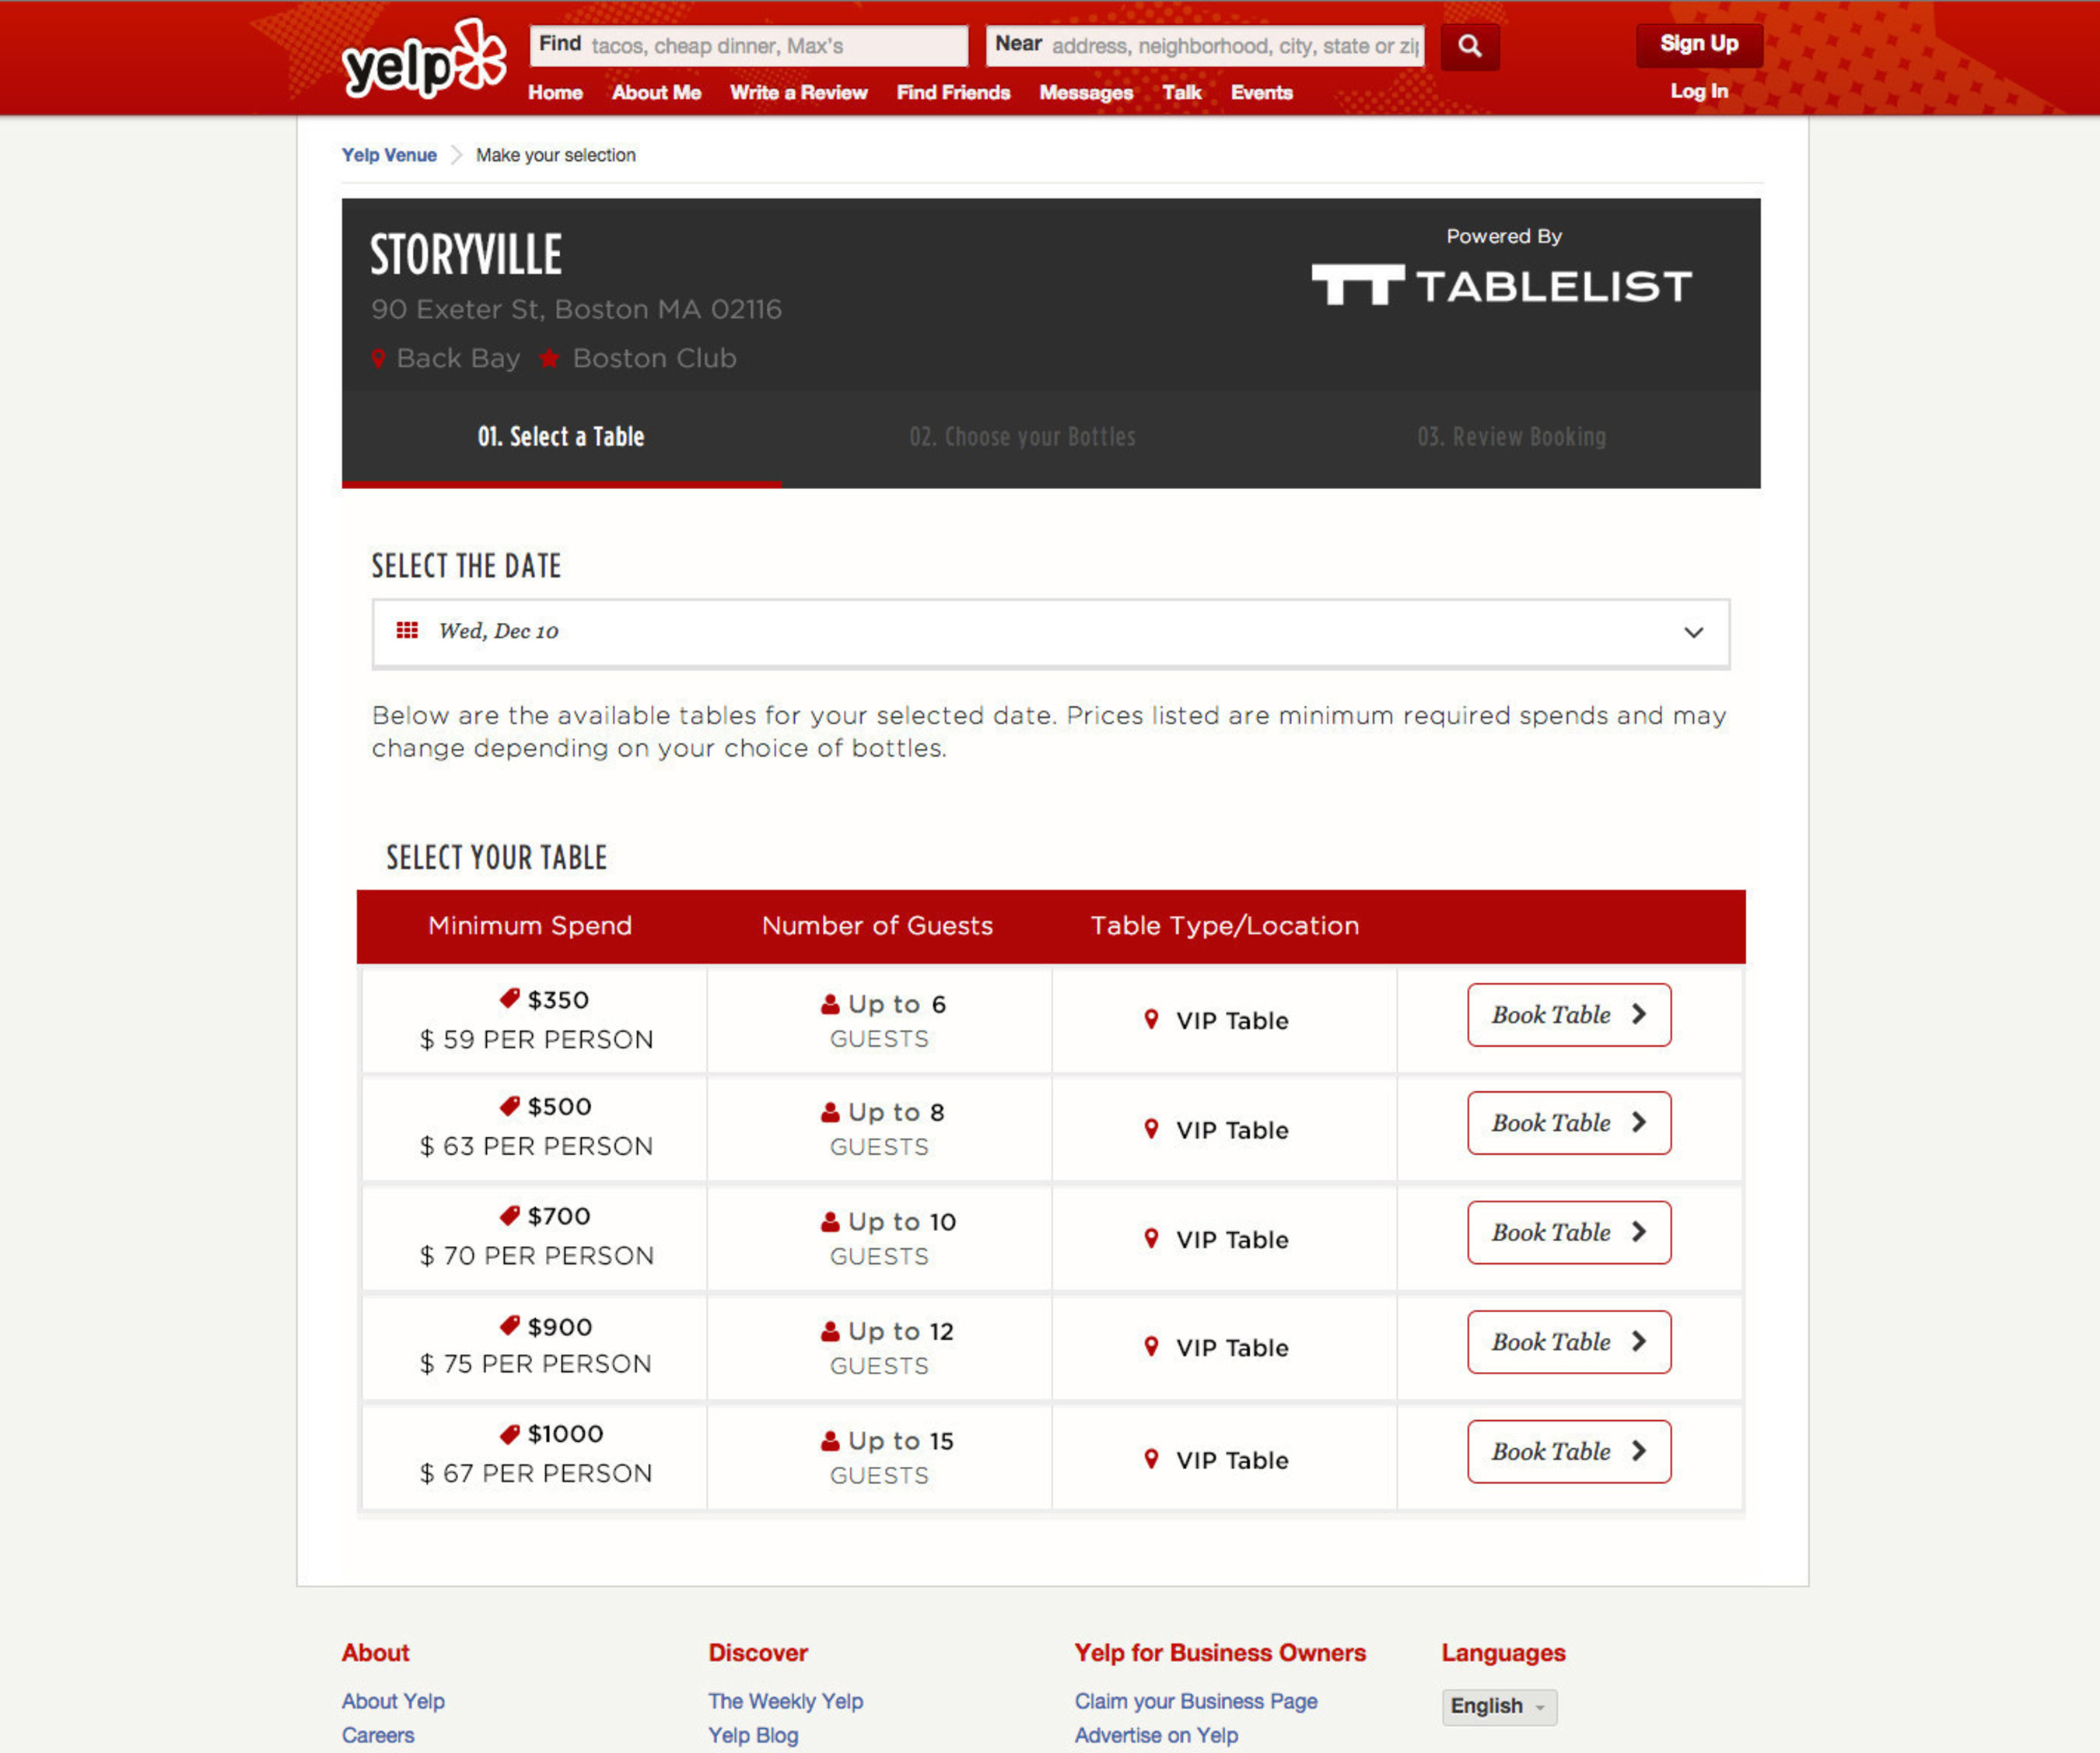 Screen shot of the seamless integration between Tablelist and Yelp. Yelp users won't have to leave the Yelp platform and will be able to book VIP nightlife reservations at their favorite venues.